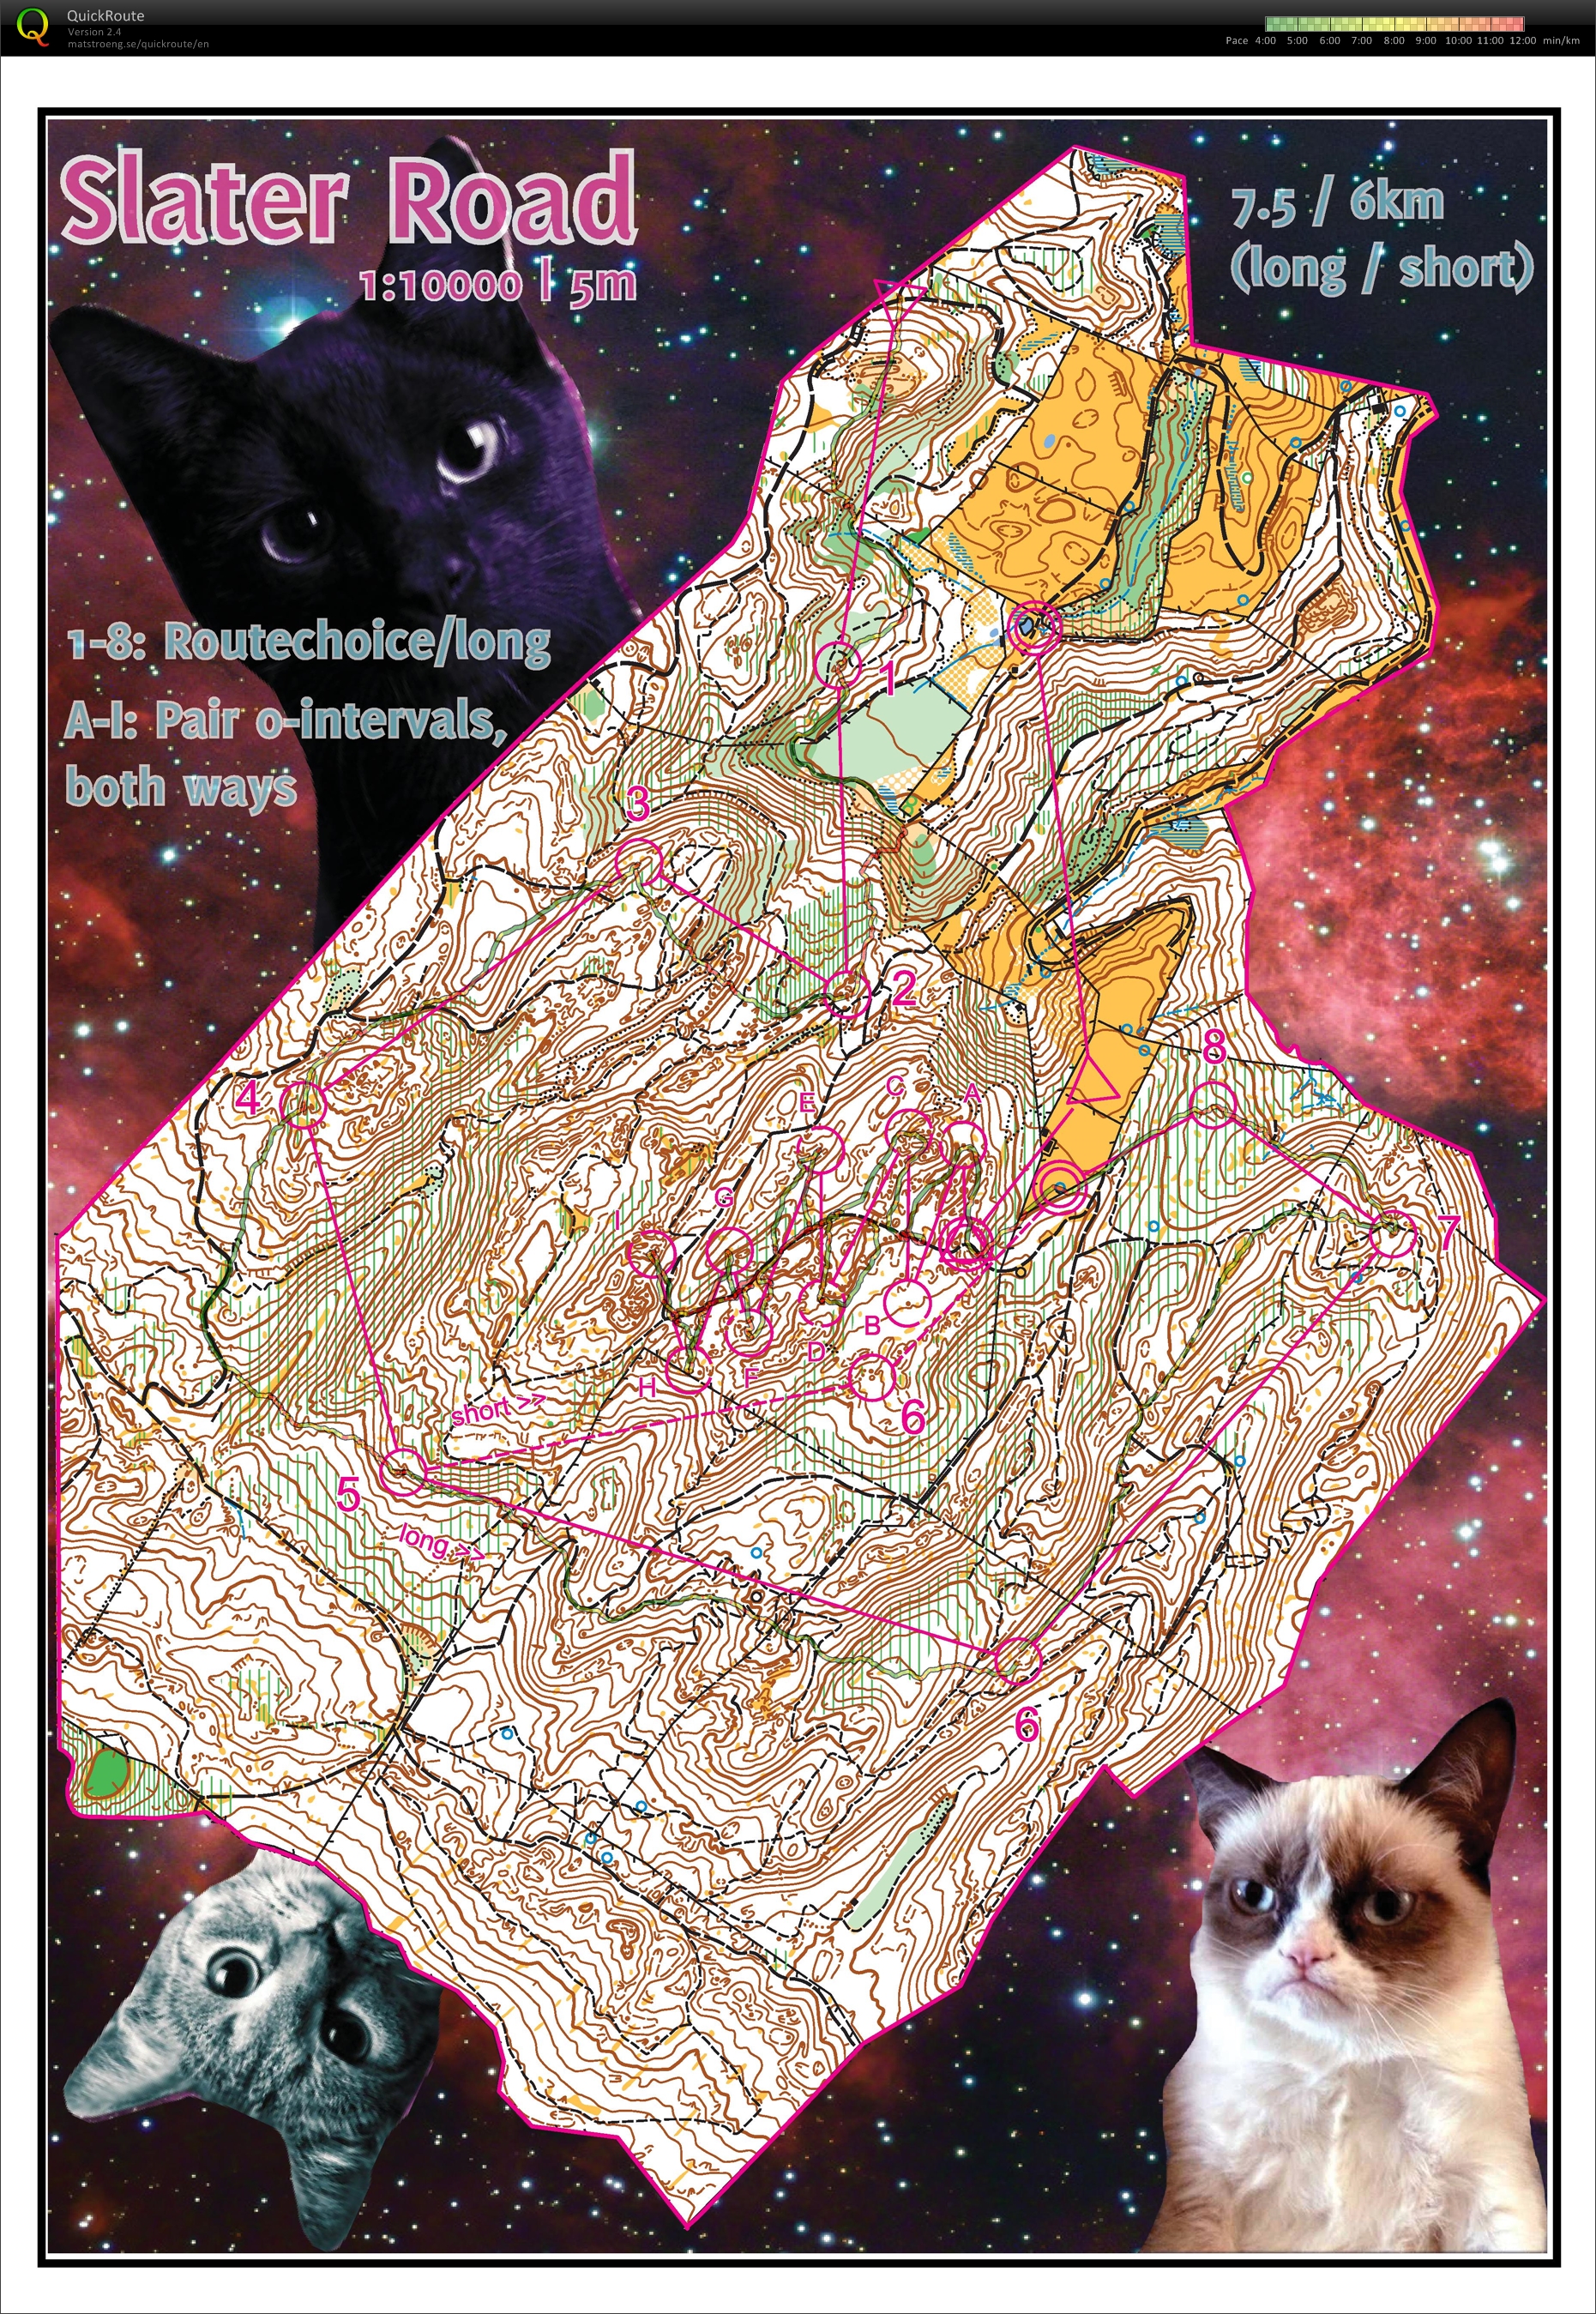 Space Cats (2014-04-26)